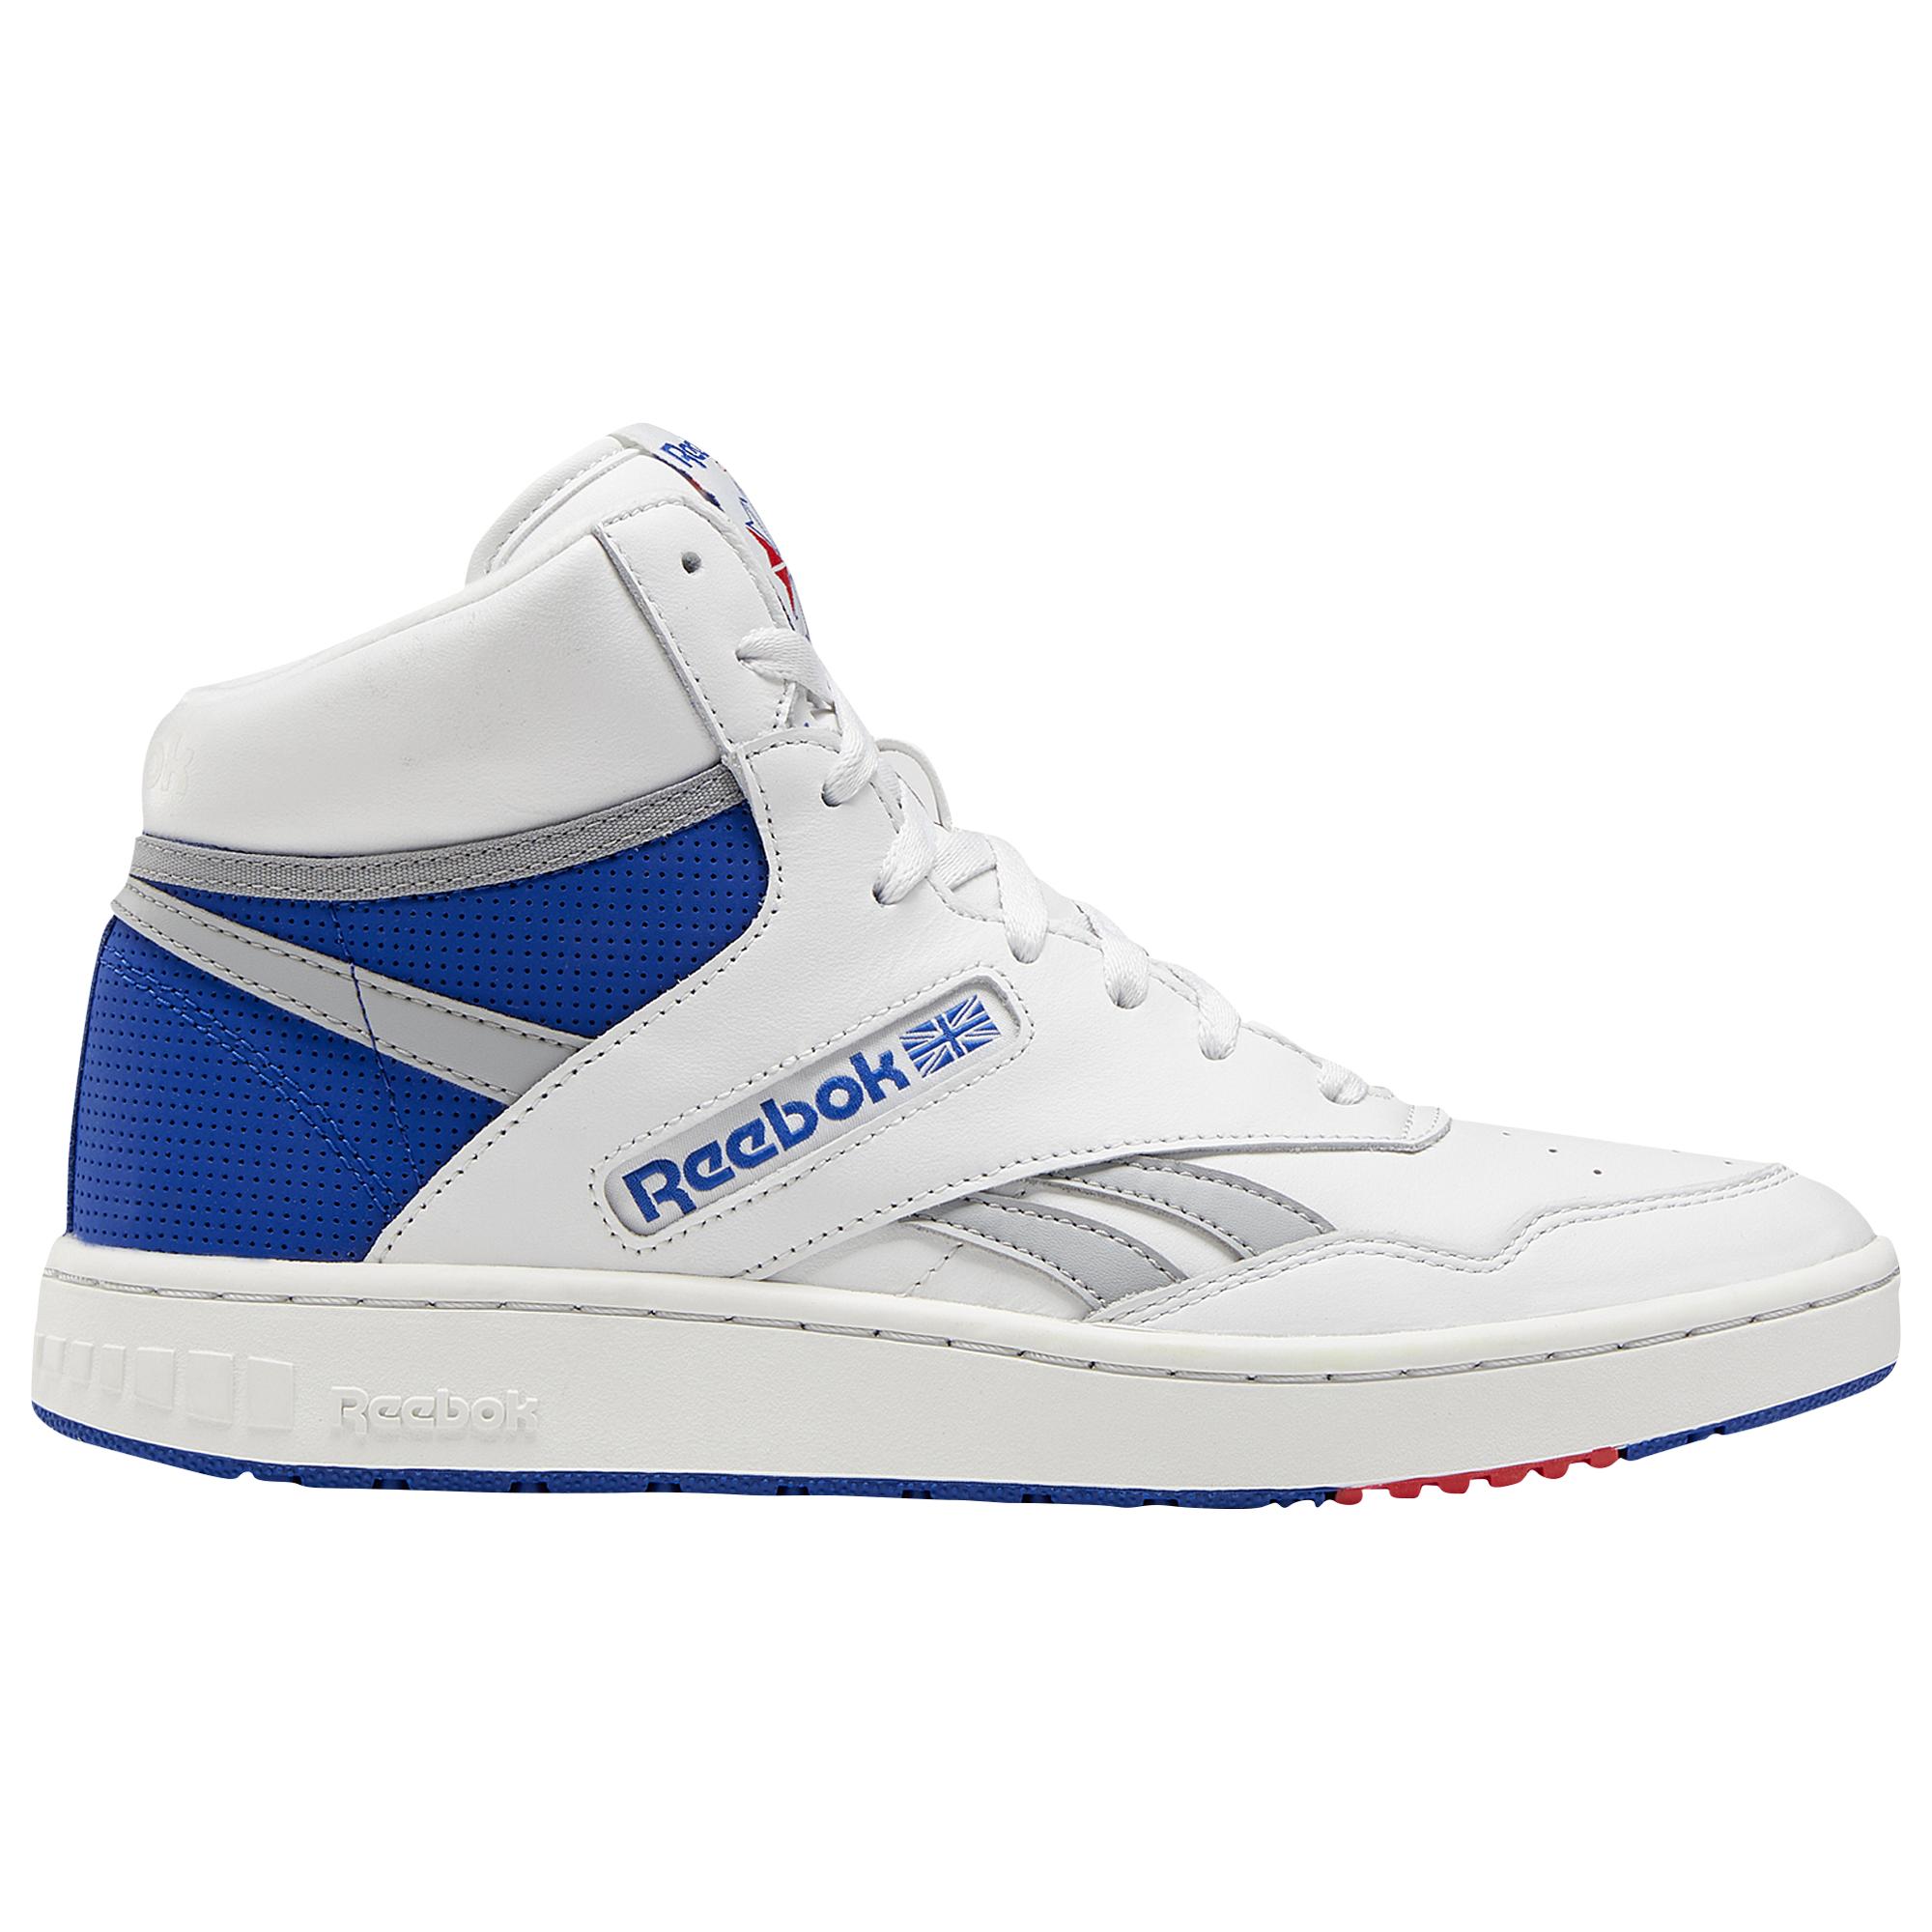 Reebok Cotton 4600 Active Basketball Shoes in Gray for Men - Save 14% ...